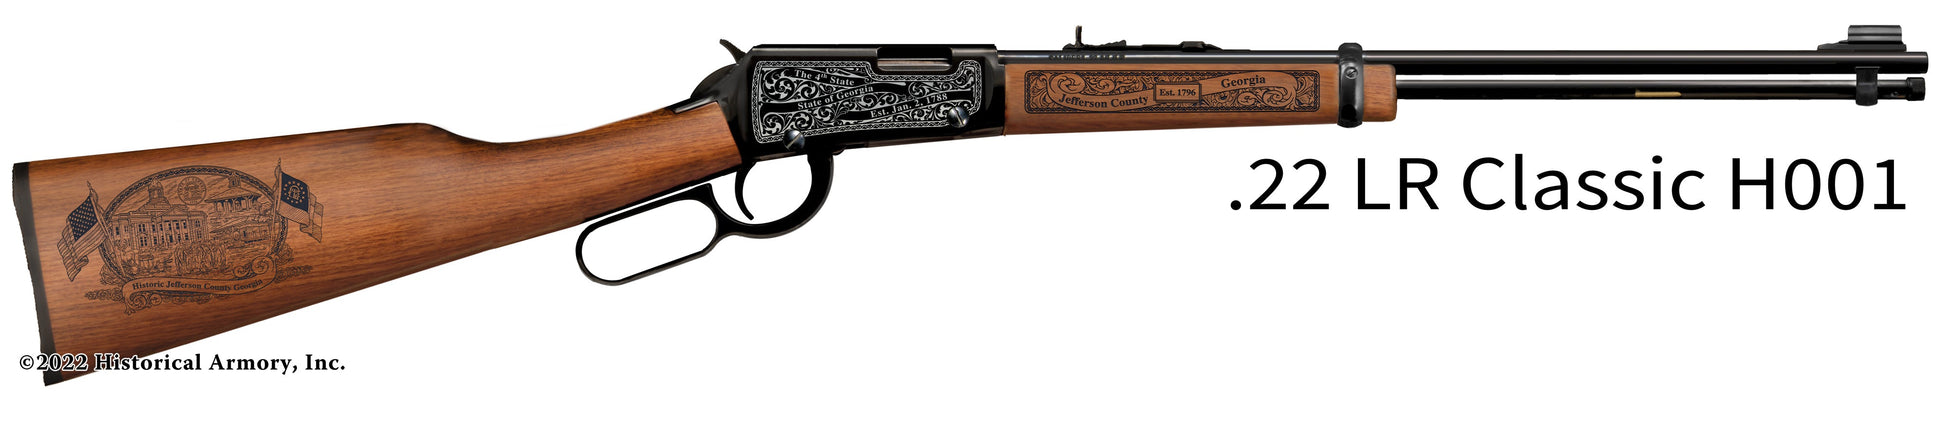 Jefferson County Georgia Engraved Henry H001 Rifle